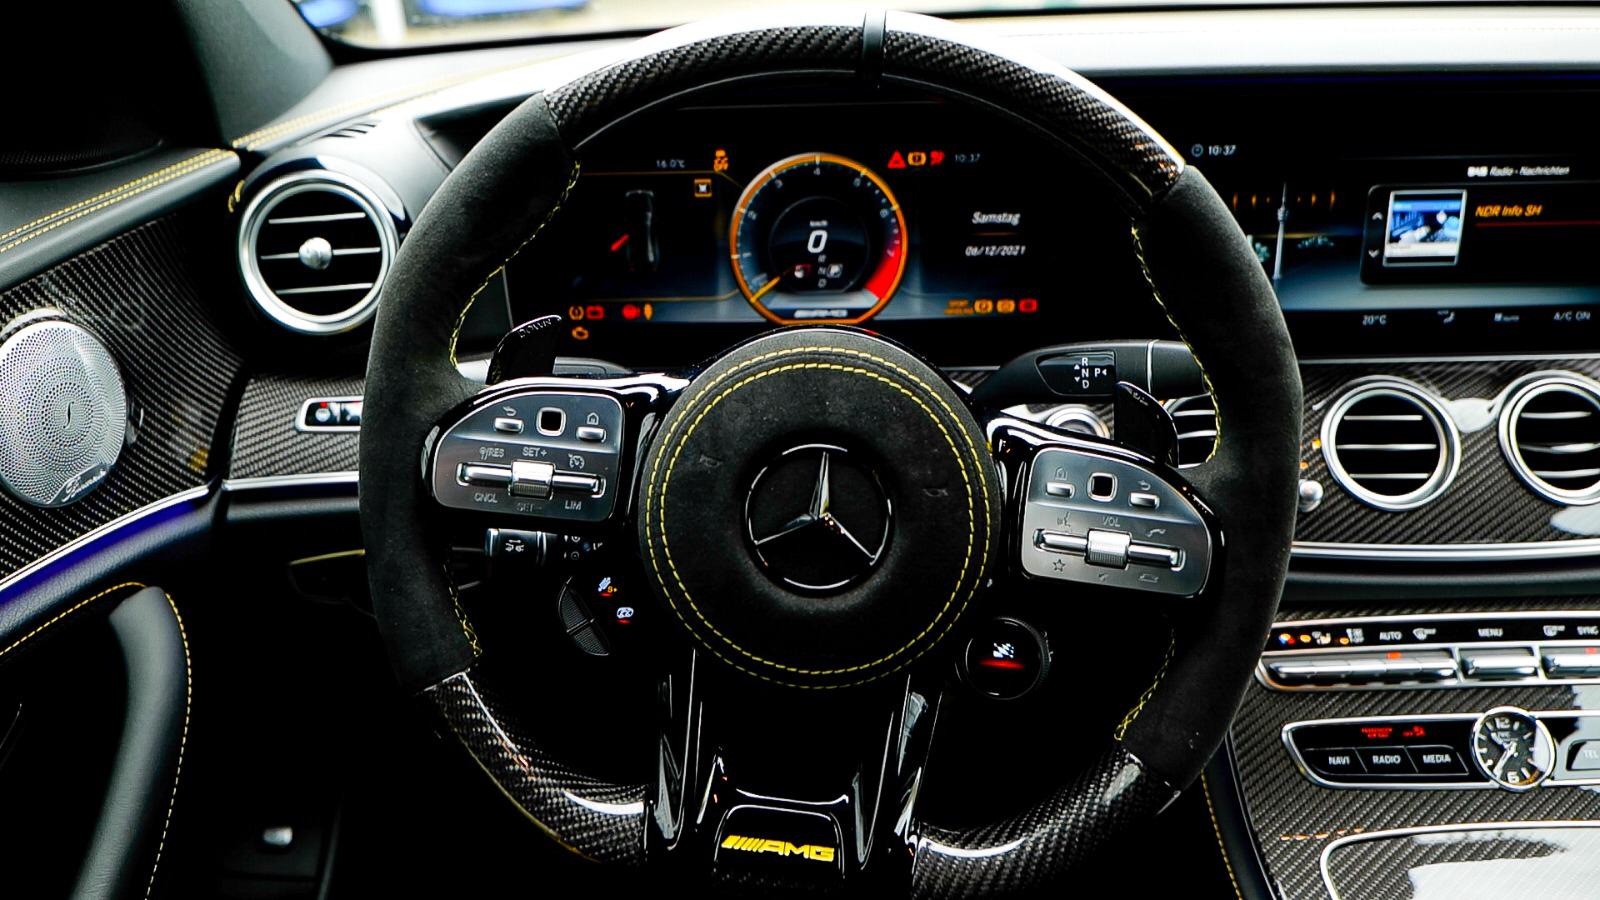 Steering wheel conversion in the Mercedes Benz - Cete Automotive GmbH